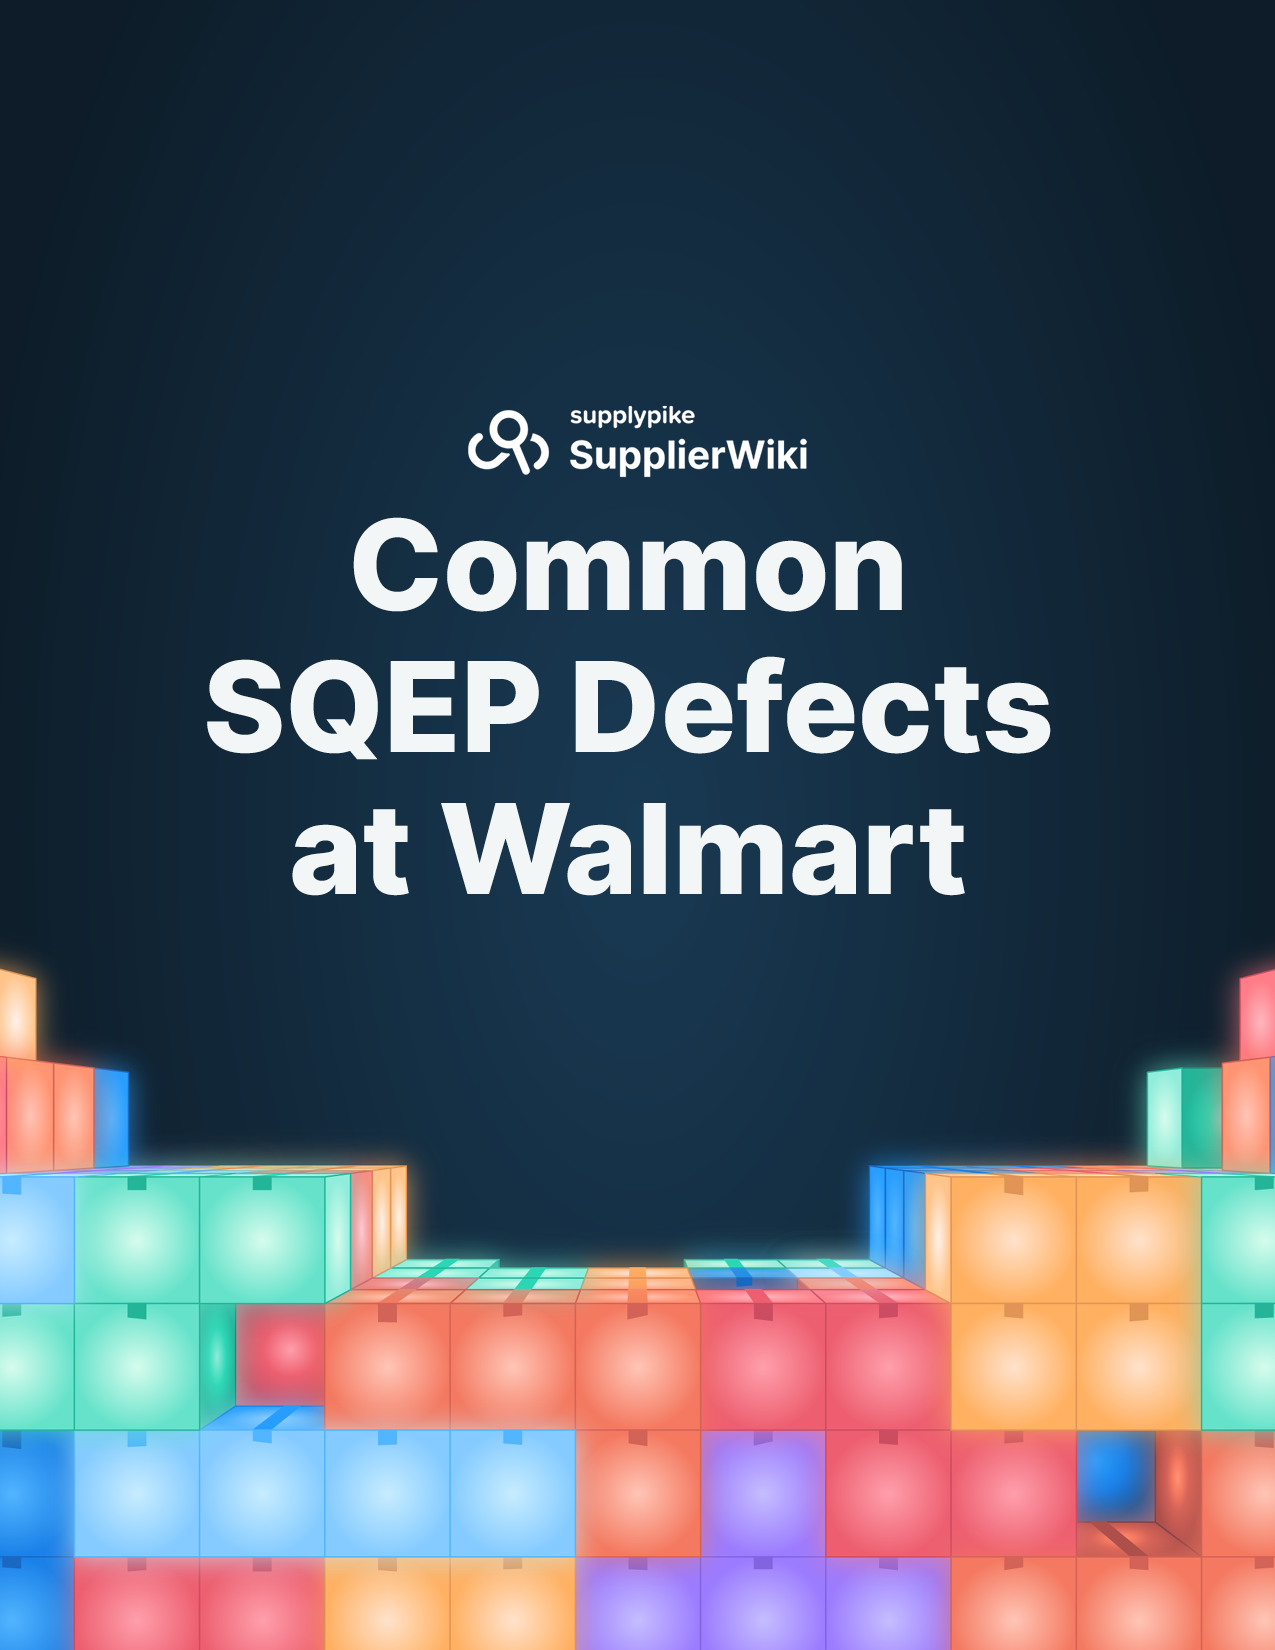 Common SQEP Defects at Walmart